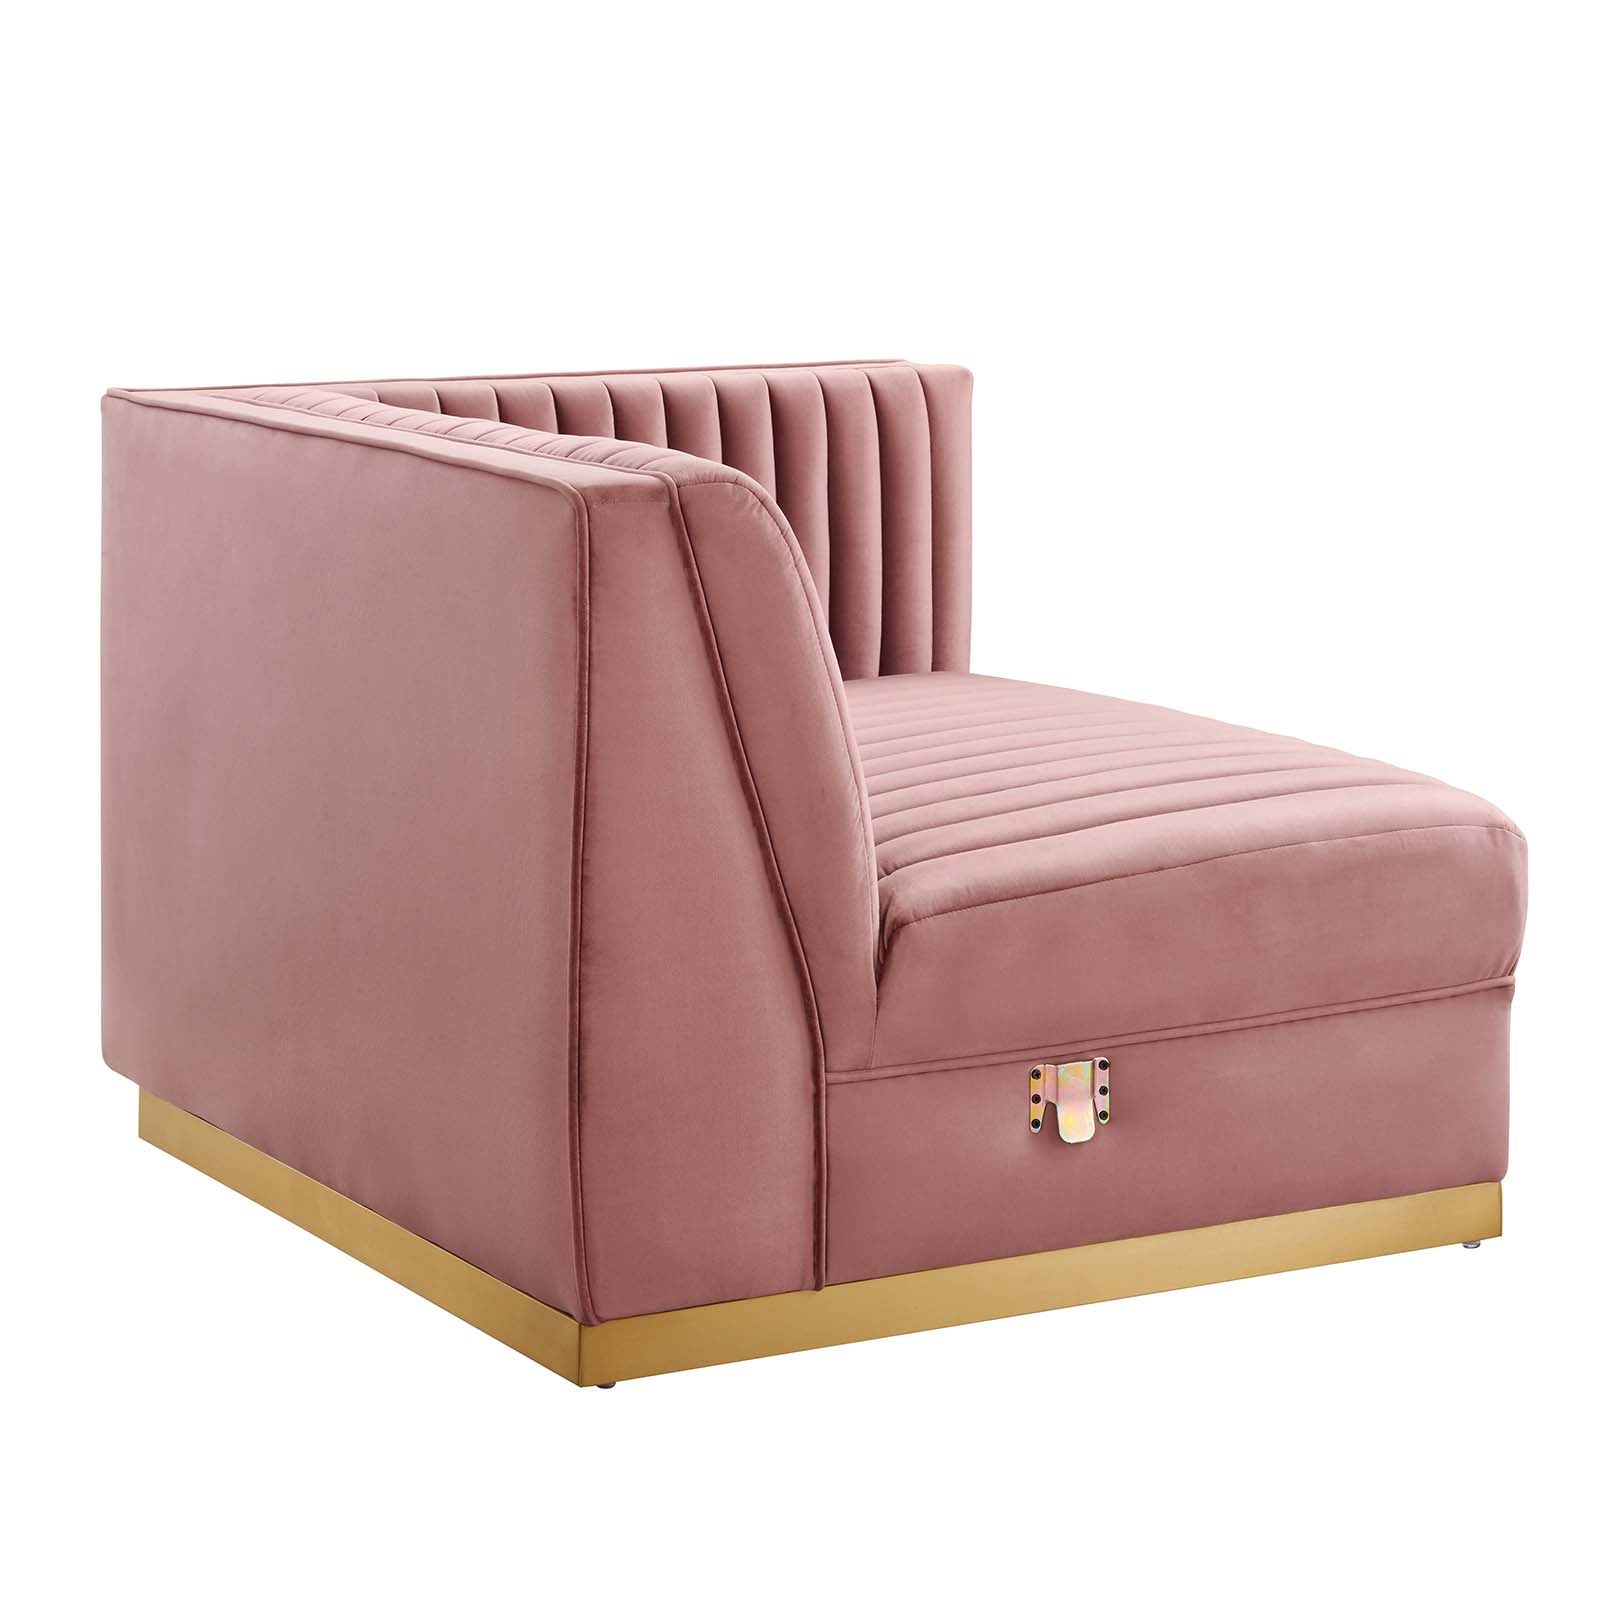 Modway Accent Chairs - Sanguine Channel Tufted Performance Velvet Modular Sectional Sofa Right-Arm Chair Dusty Rose